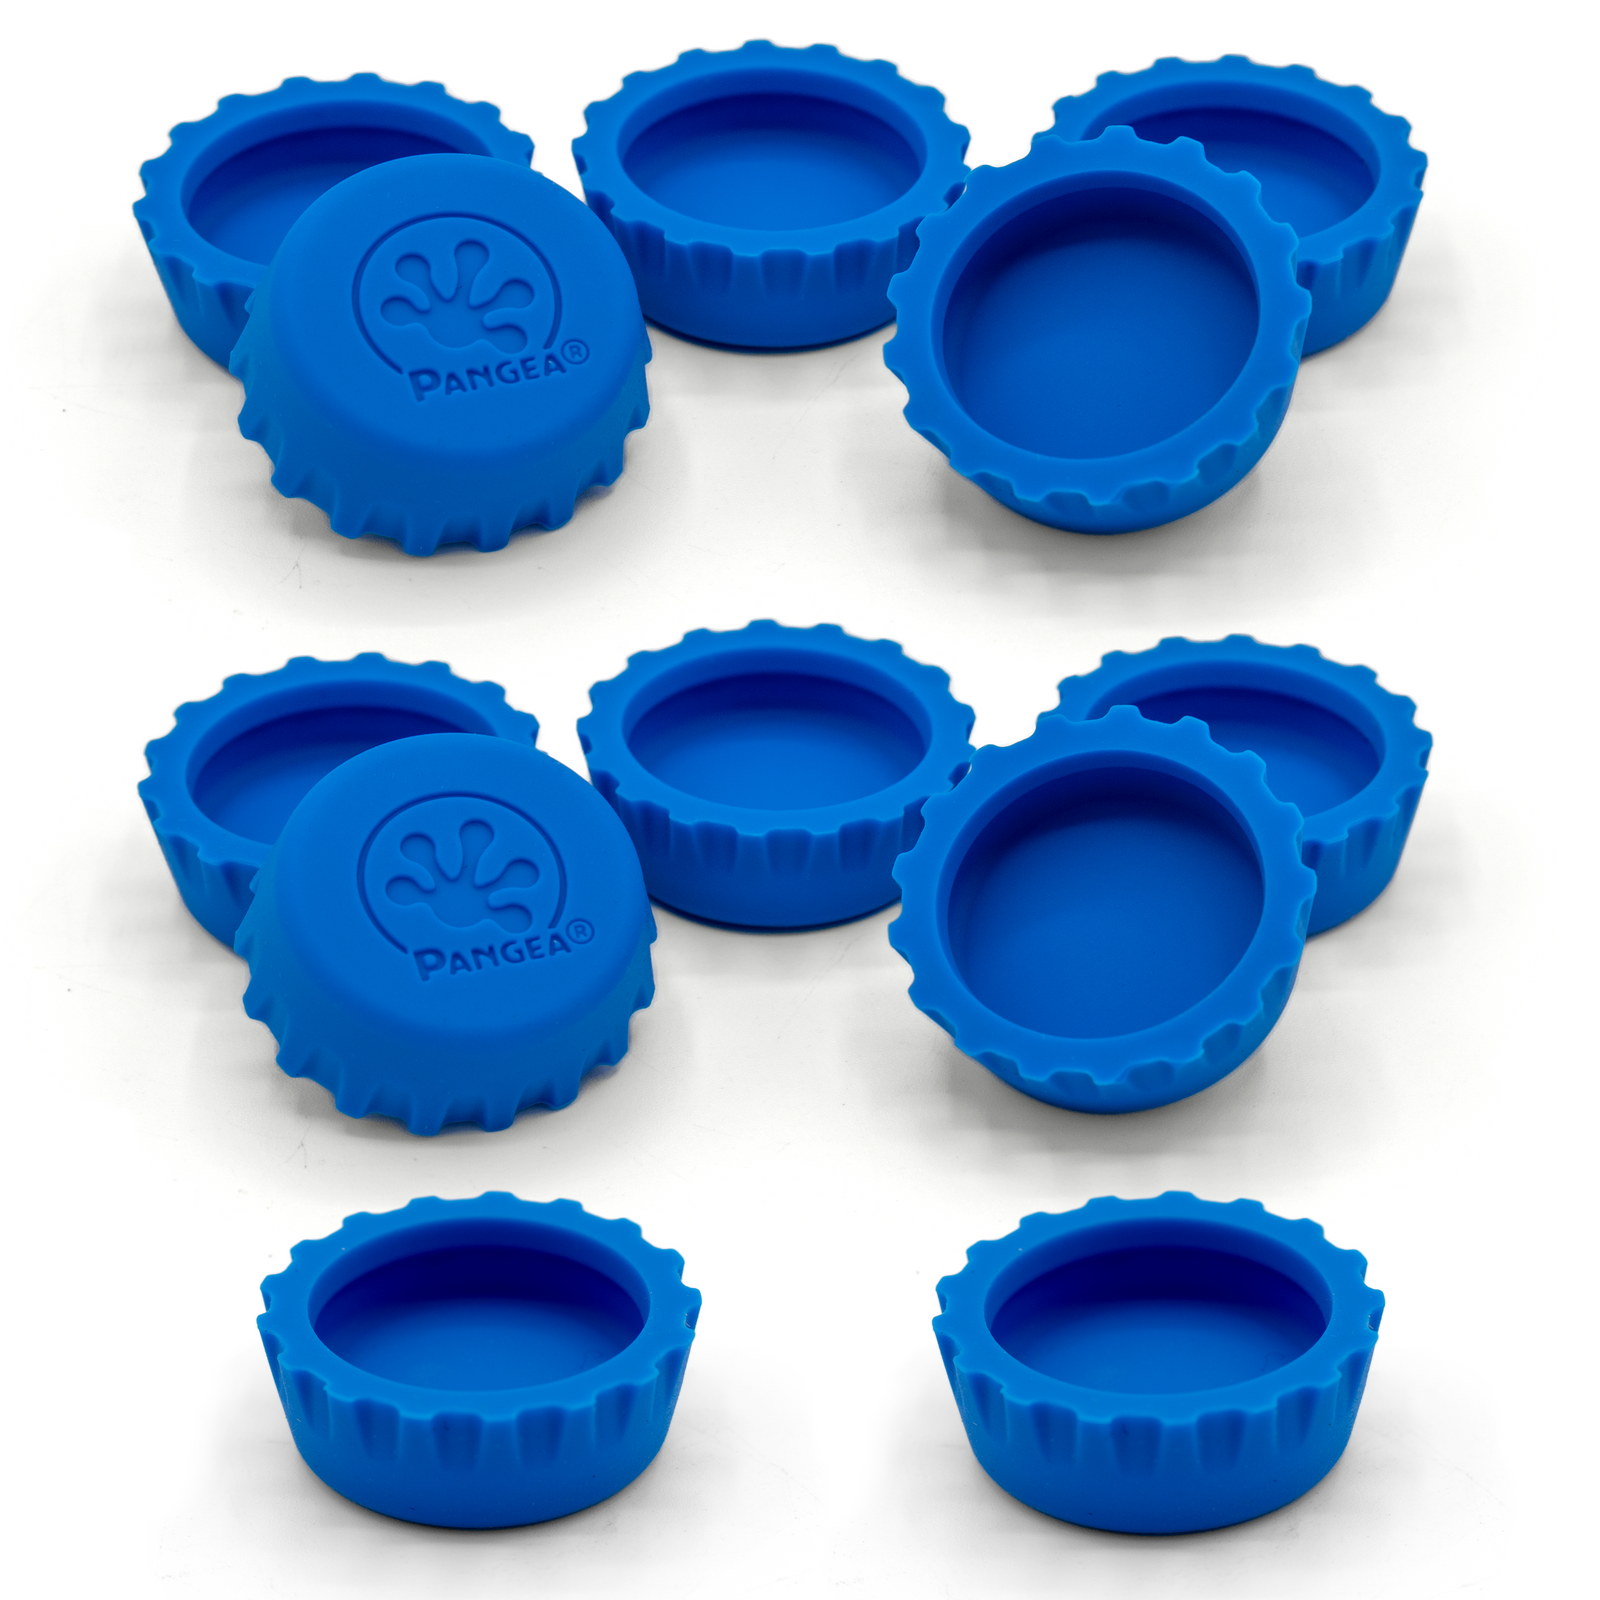 2-Pack of Silicone Bottle Cap Gecko Feeding Dishes - Pangea Reptile LLC